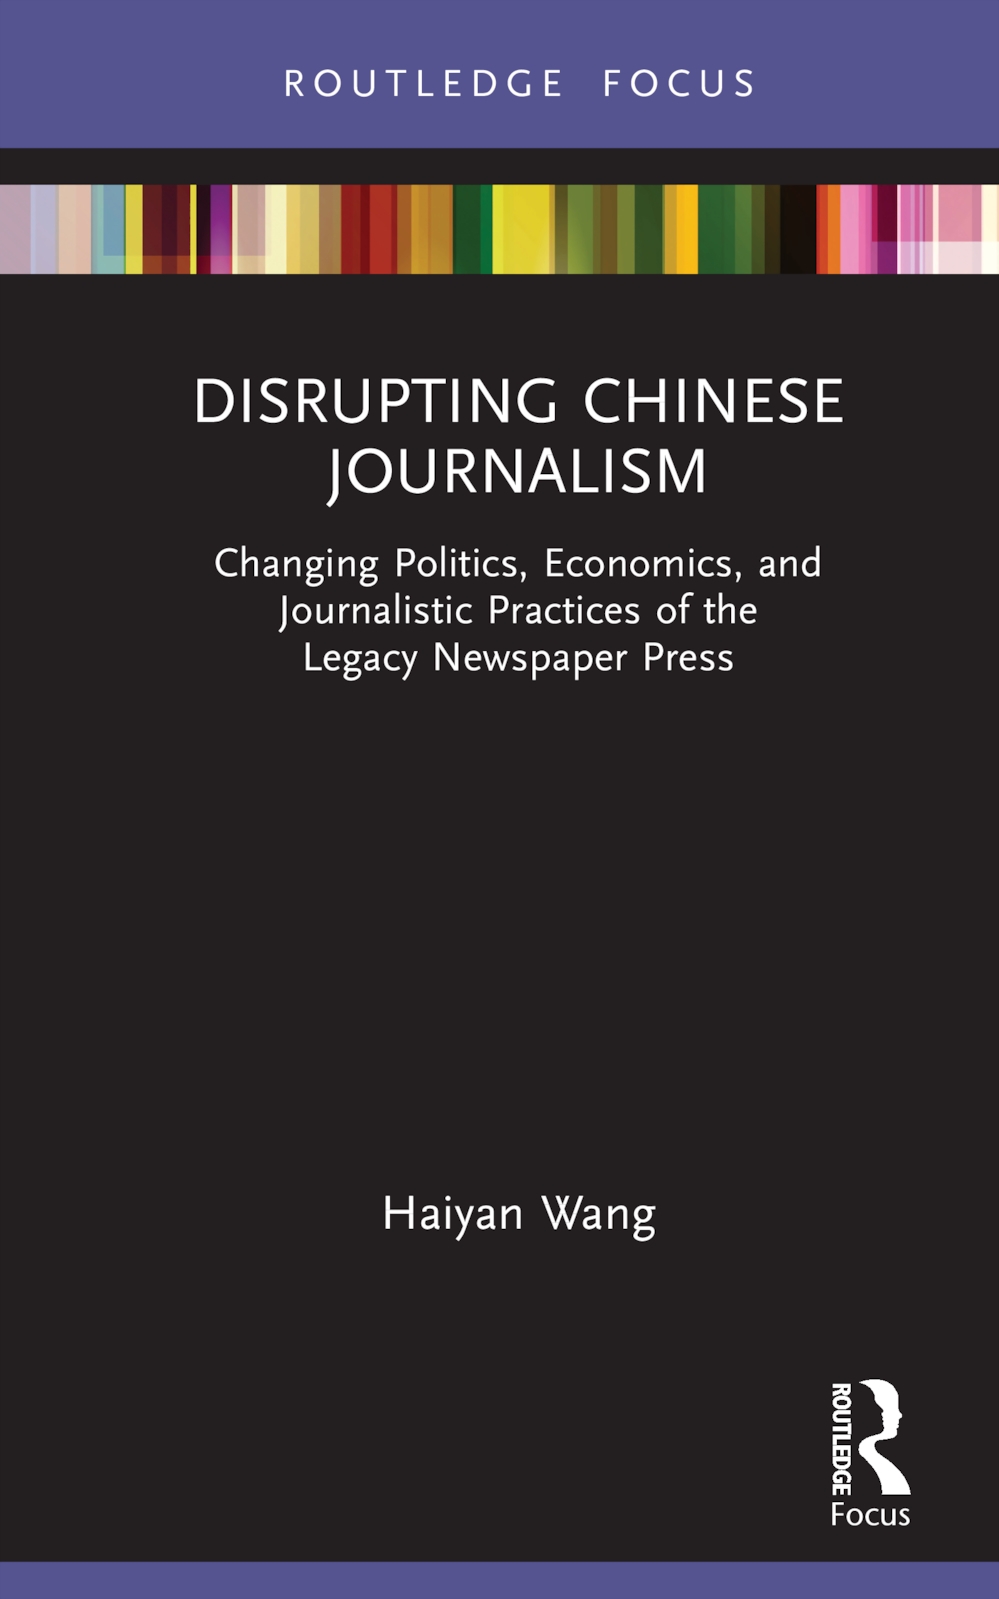 Disrupting Chinese Journalism: Changing Politics, Policies and Practices of the Legacy Newspaper Press